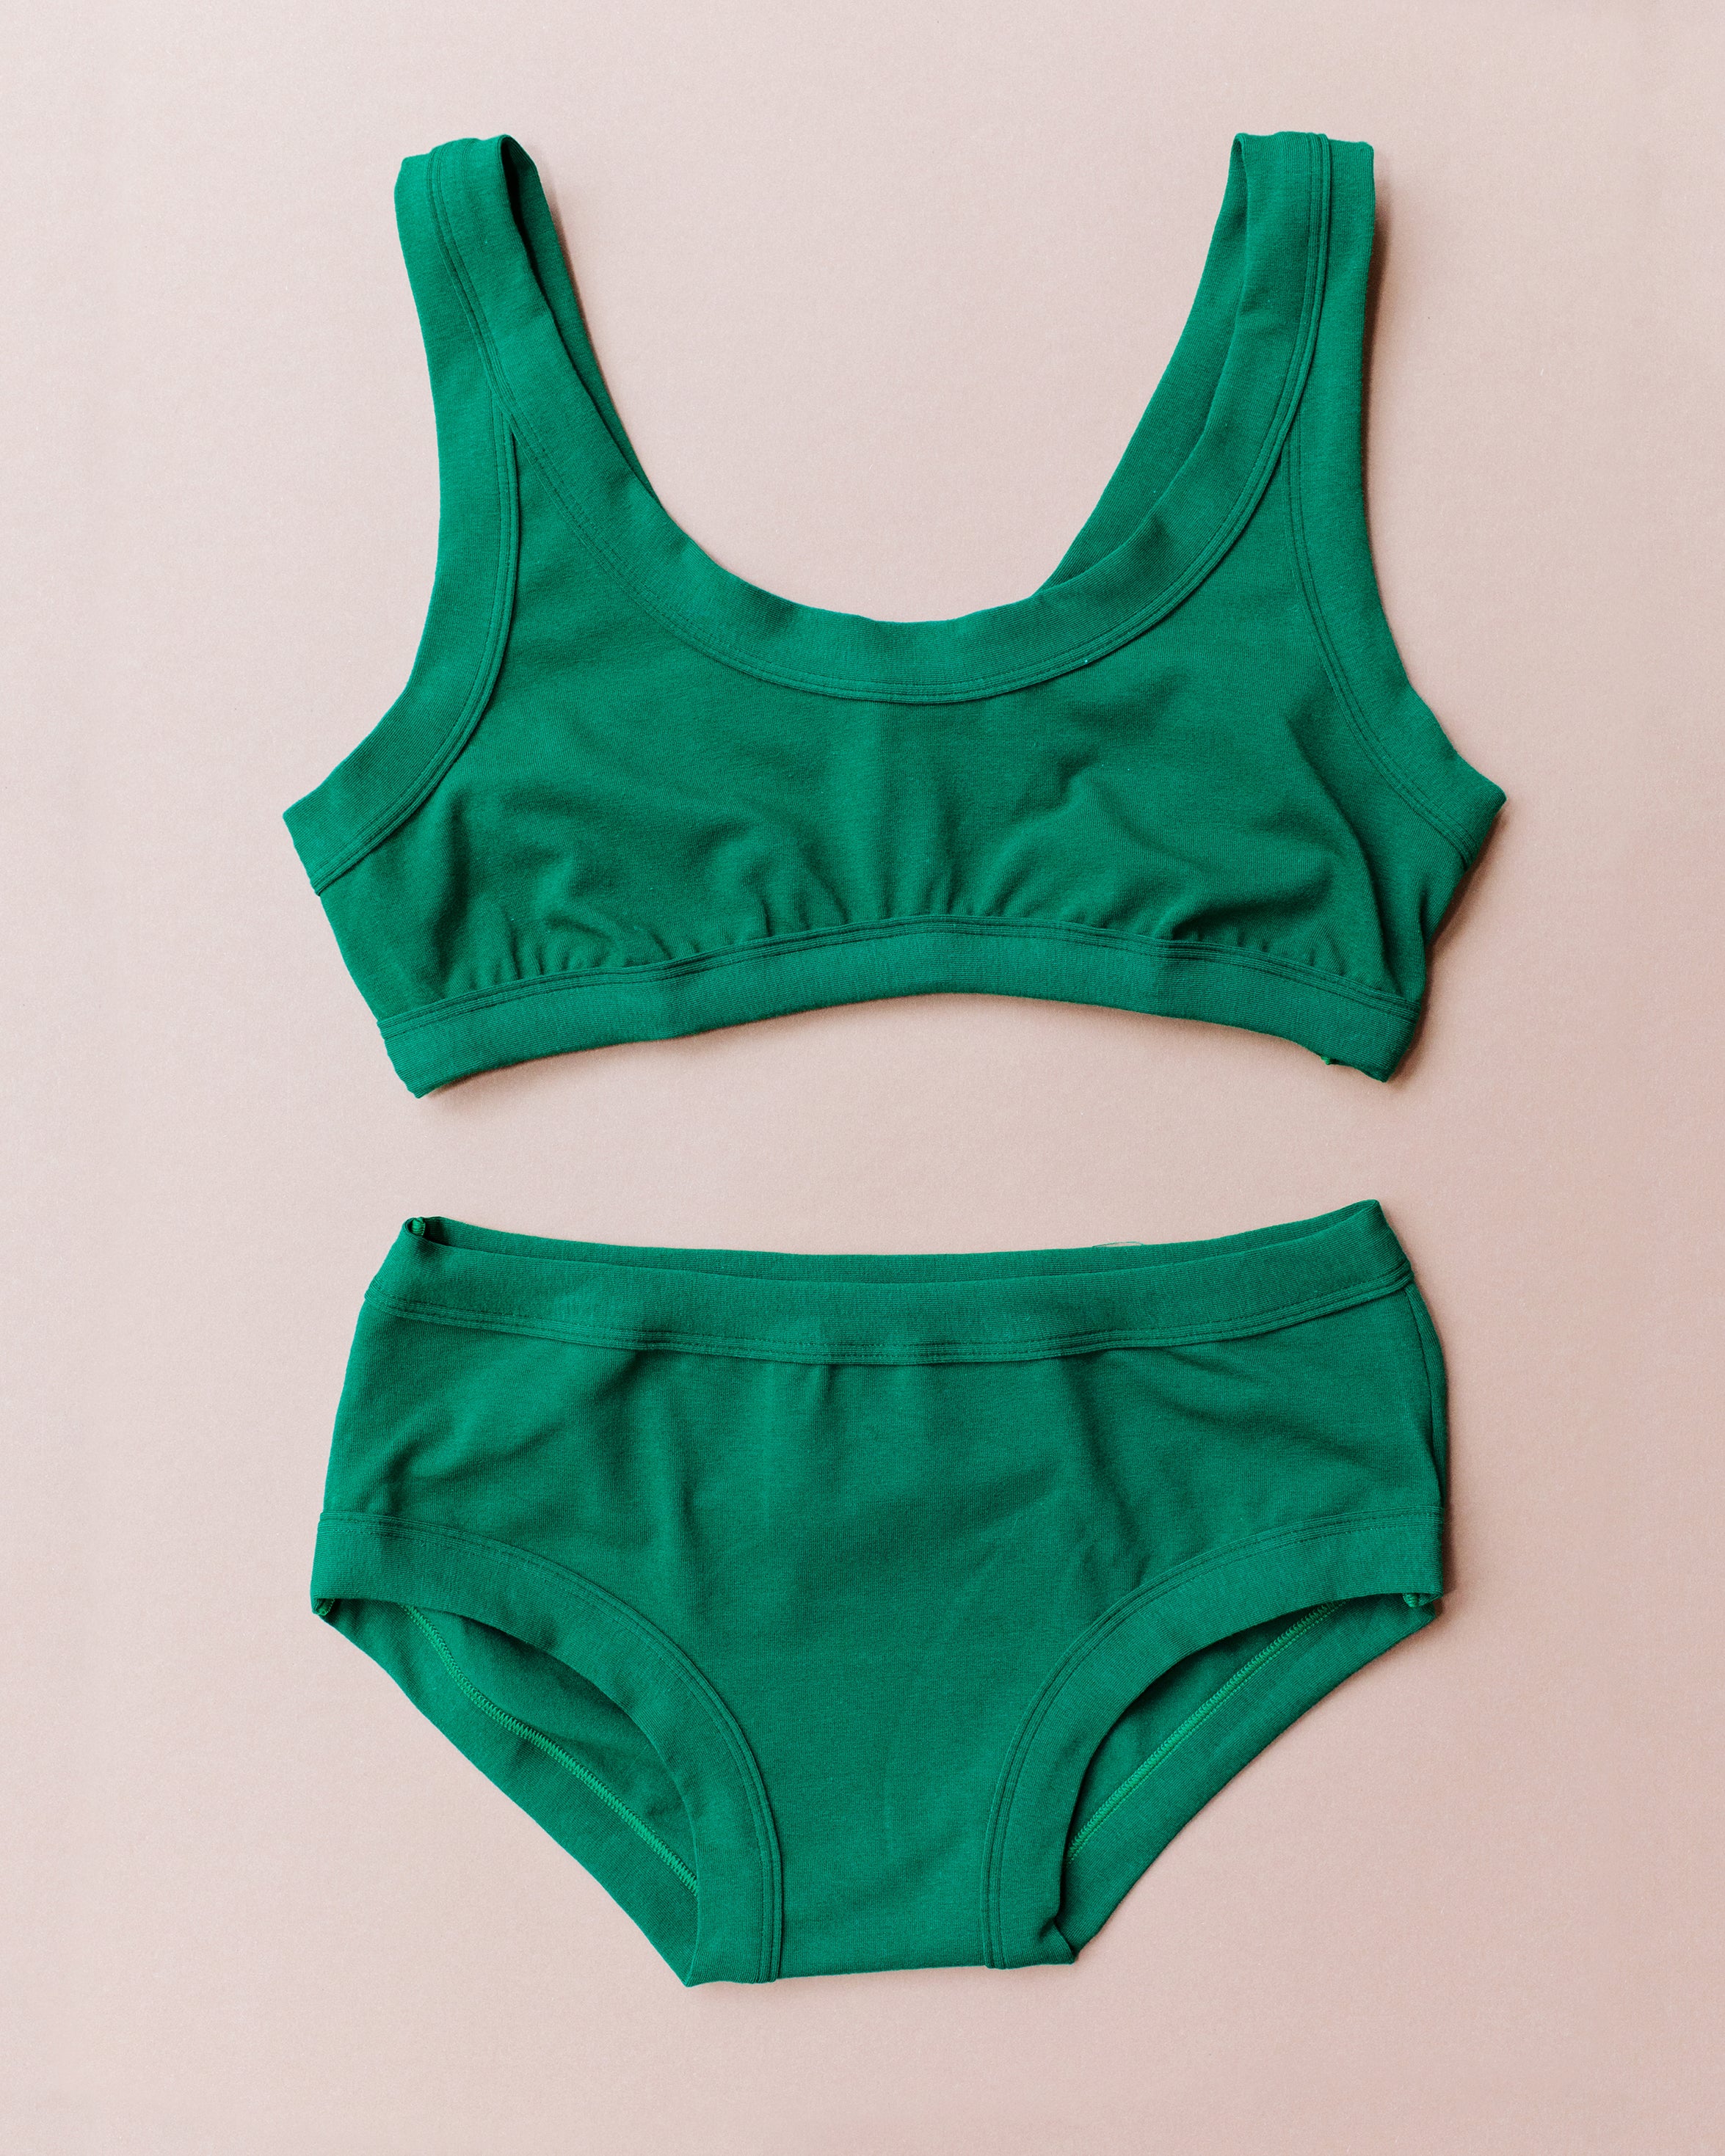 Flat lay of Thunderpants Hipster style underwear and Bralette set in Emerald Green.